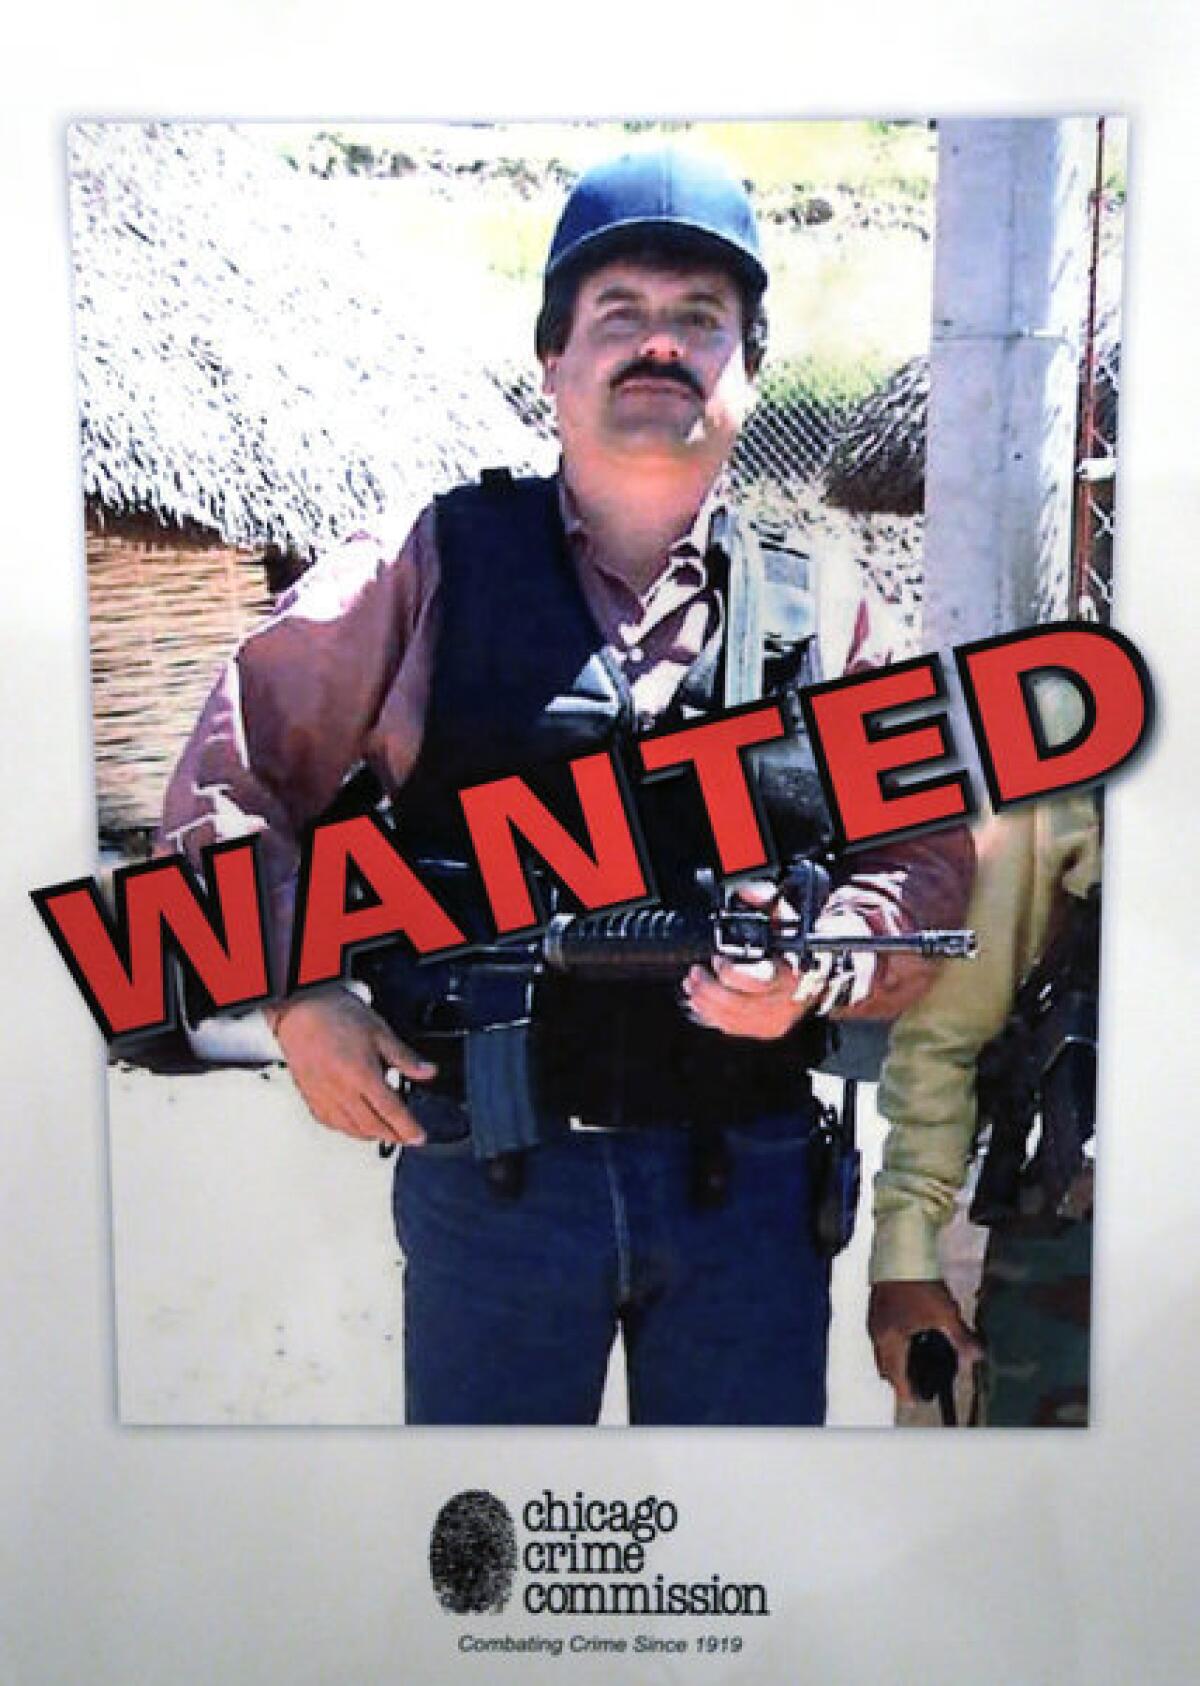 Poster of Joaquin "Chapo" Guzman was displayed at a Chicago Crime Commission news conference Feb. 14 in Chicago, where the reputed Mexican drug kingpin was deemed Chicago's Public Enemy No. 1, the first time the designation has been used since Prohibition, when the label was created for Al Capone.